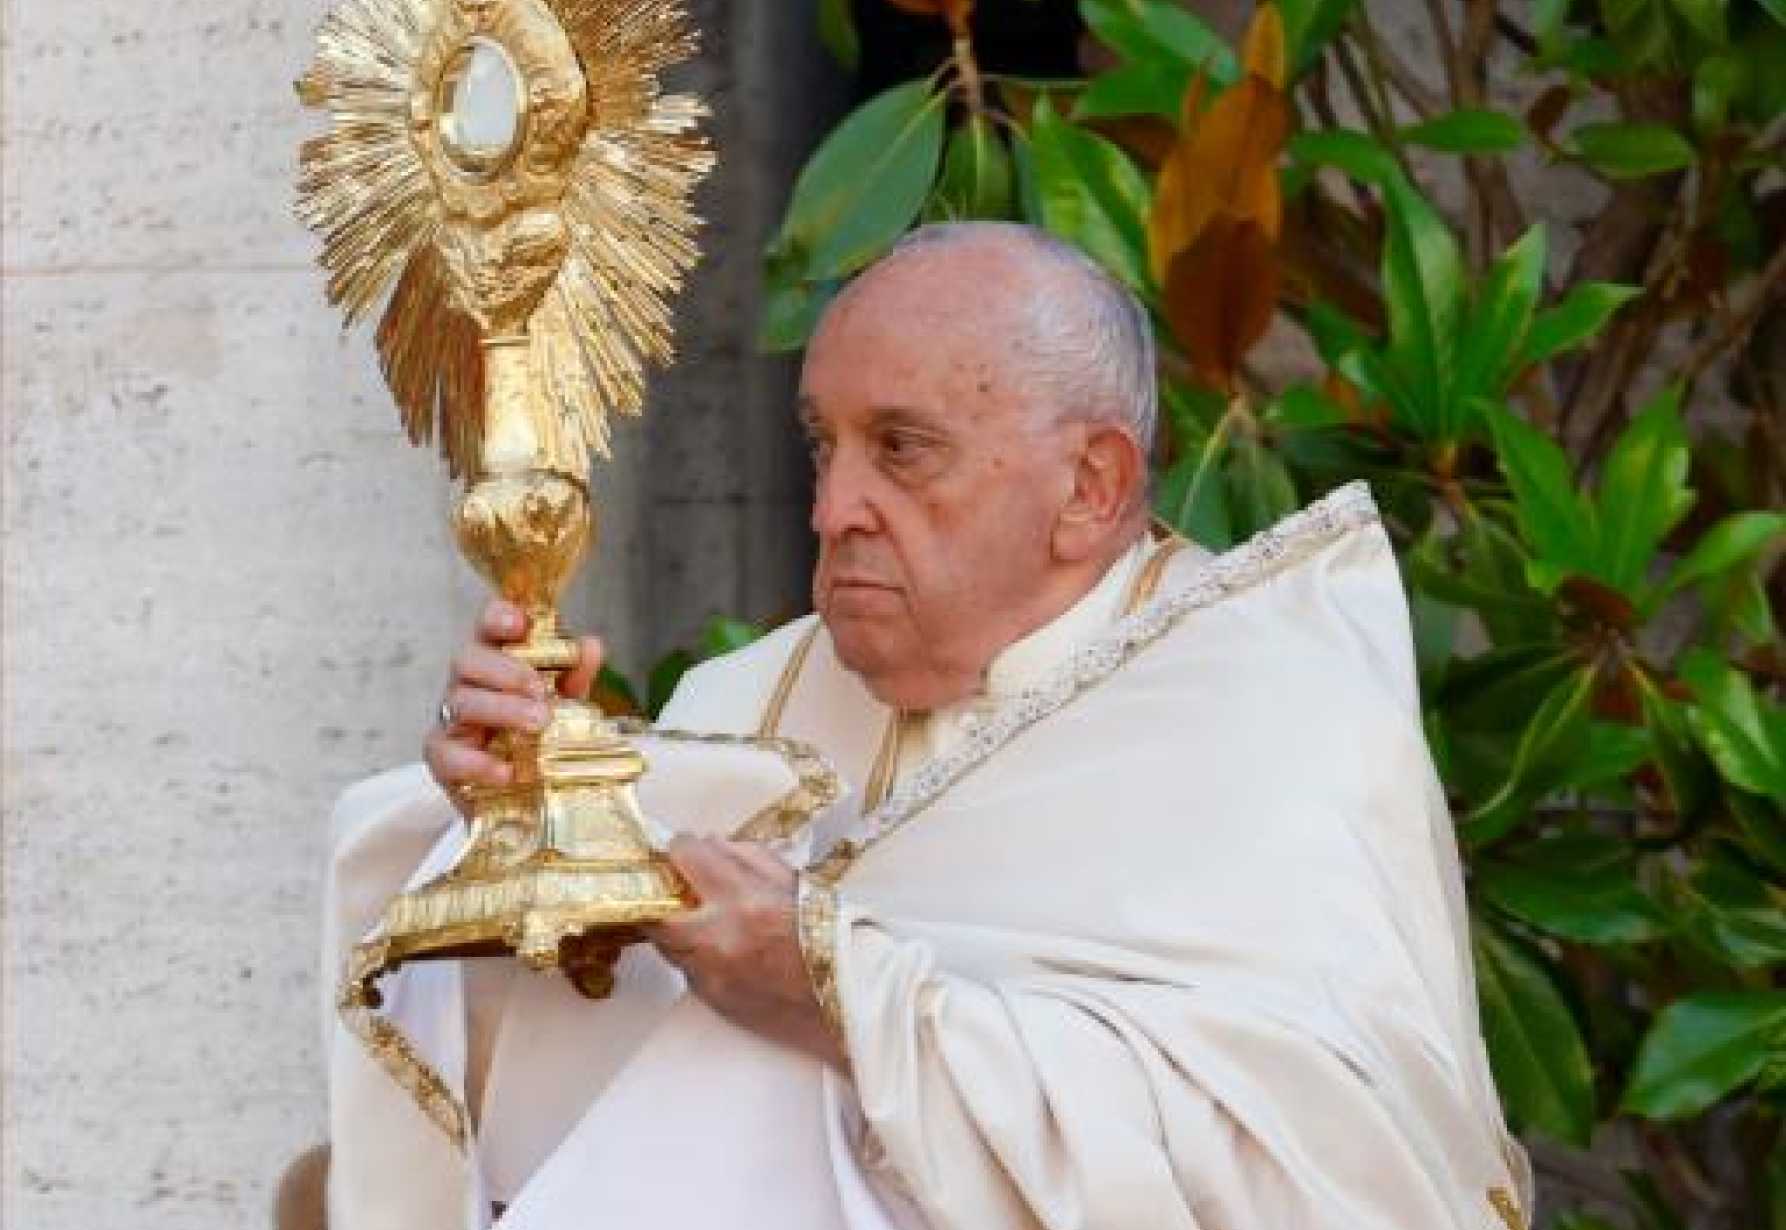 Corpus Christi procession is not sign of pride but invitation, pope says